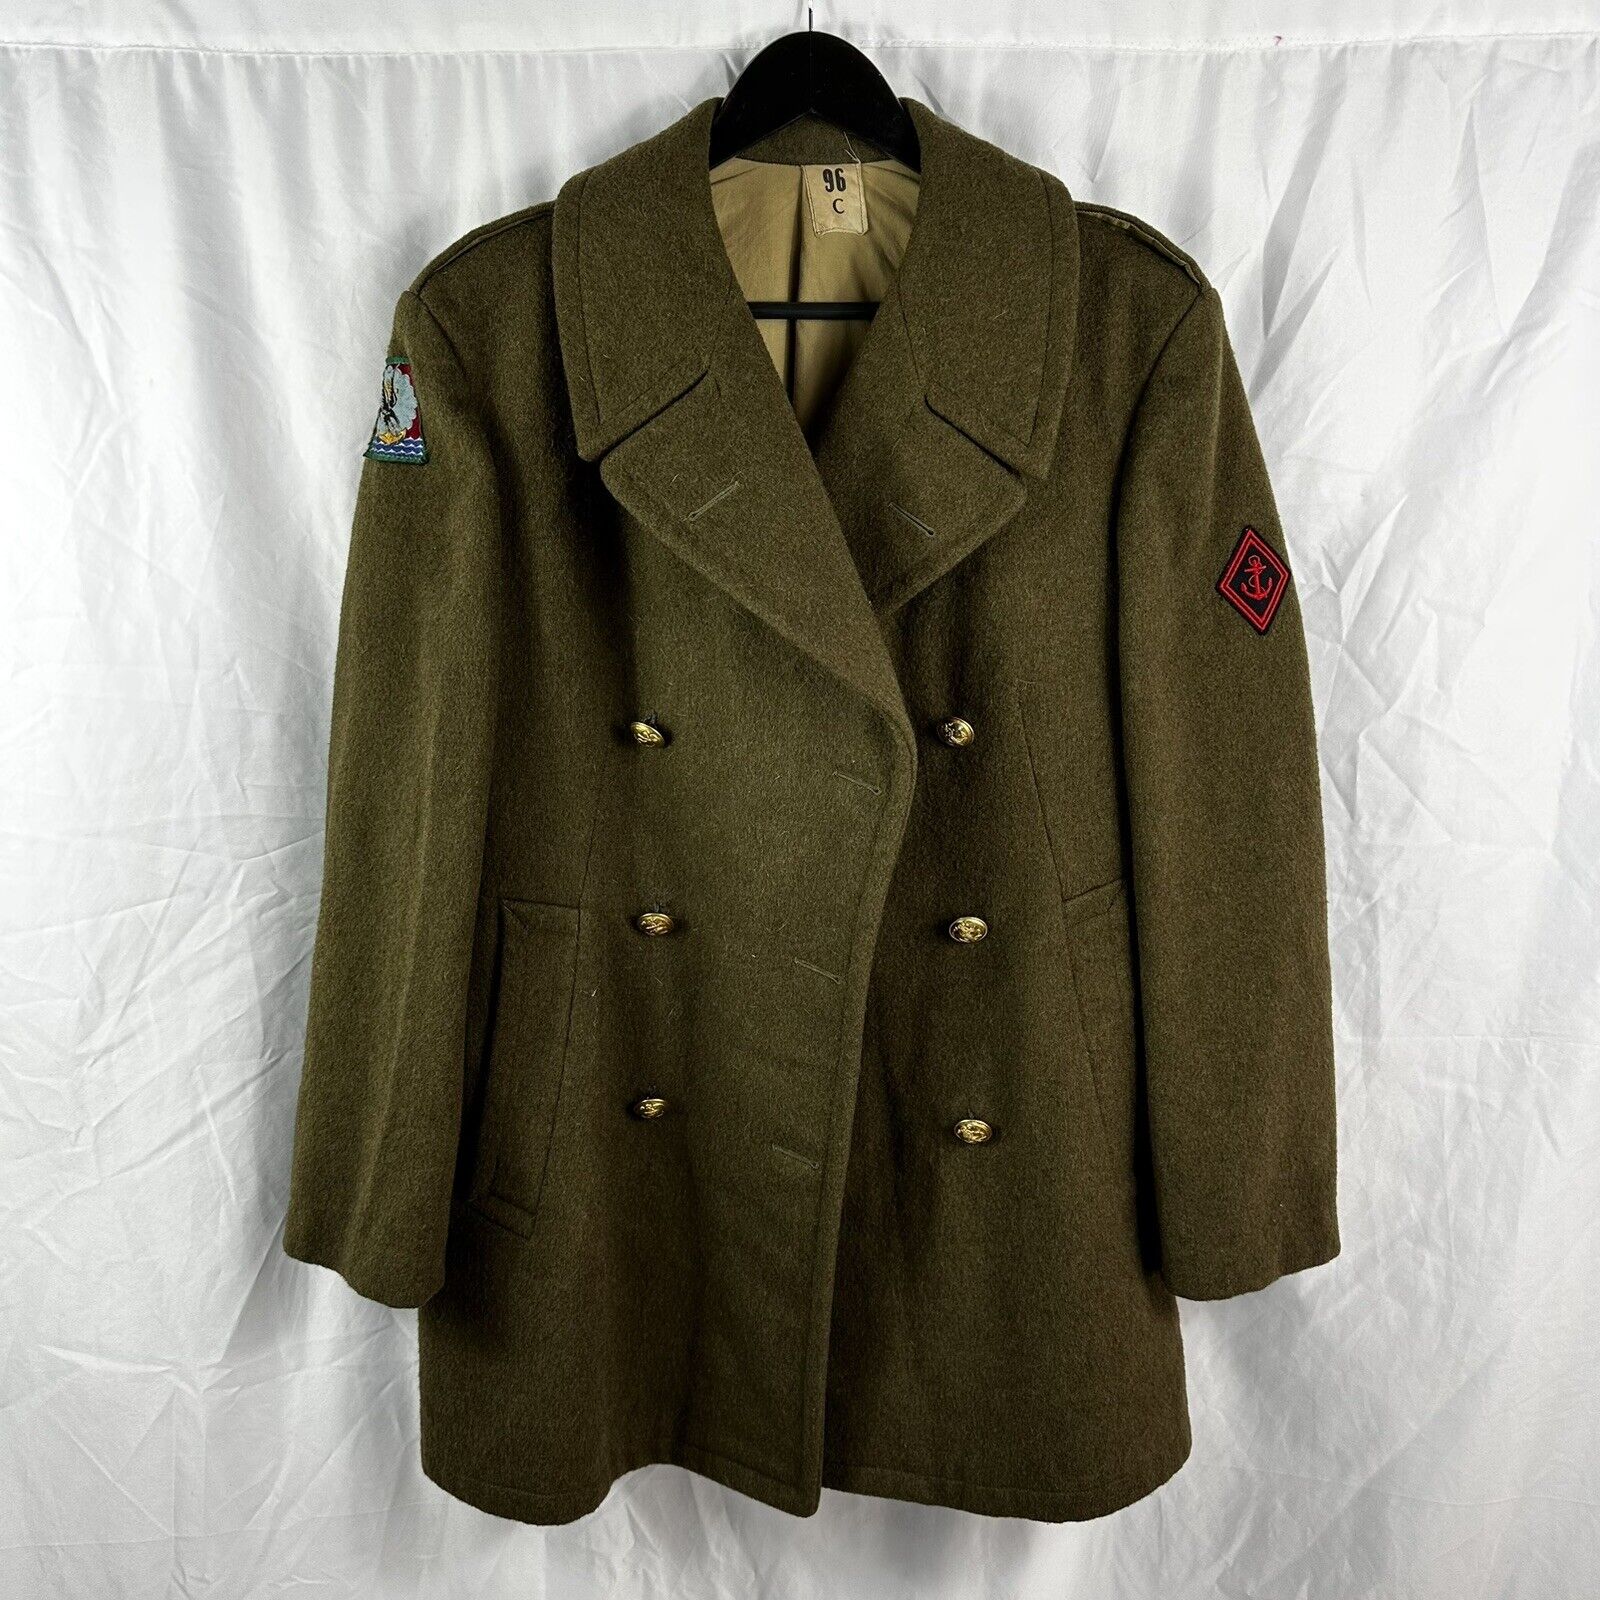 Vintage Algerian War French Colonial Airborne Patched Pea Coat Overcoat Jacket